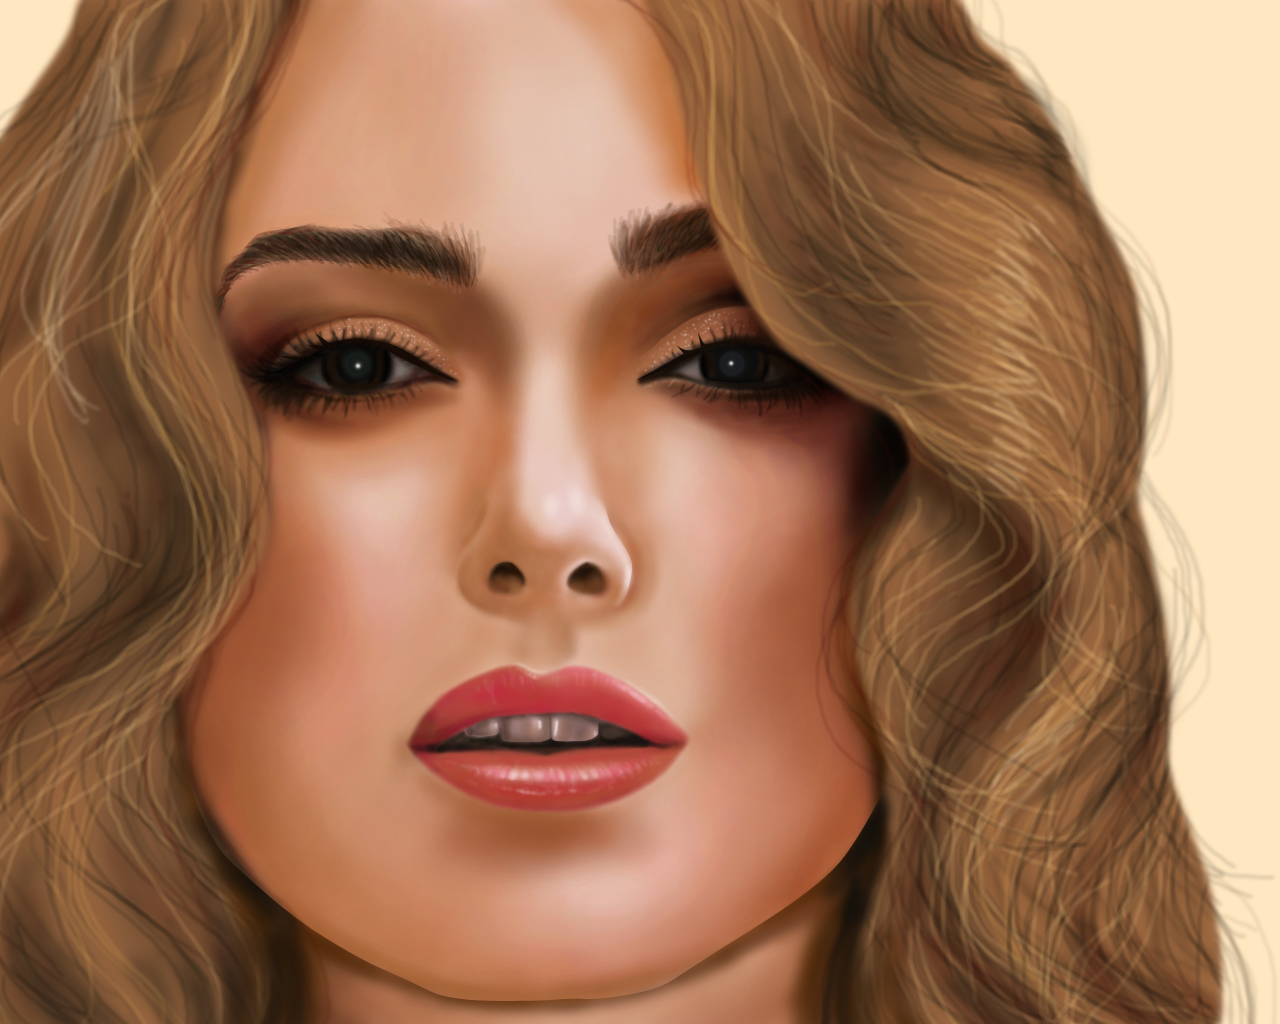 Digital Painting Of A Hollywood Actress